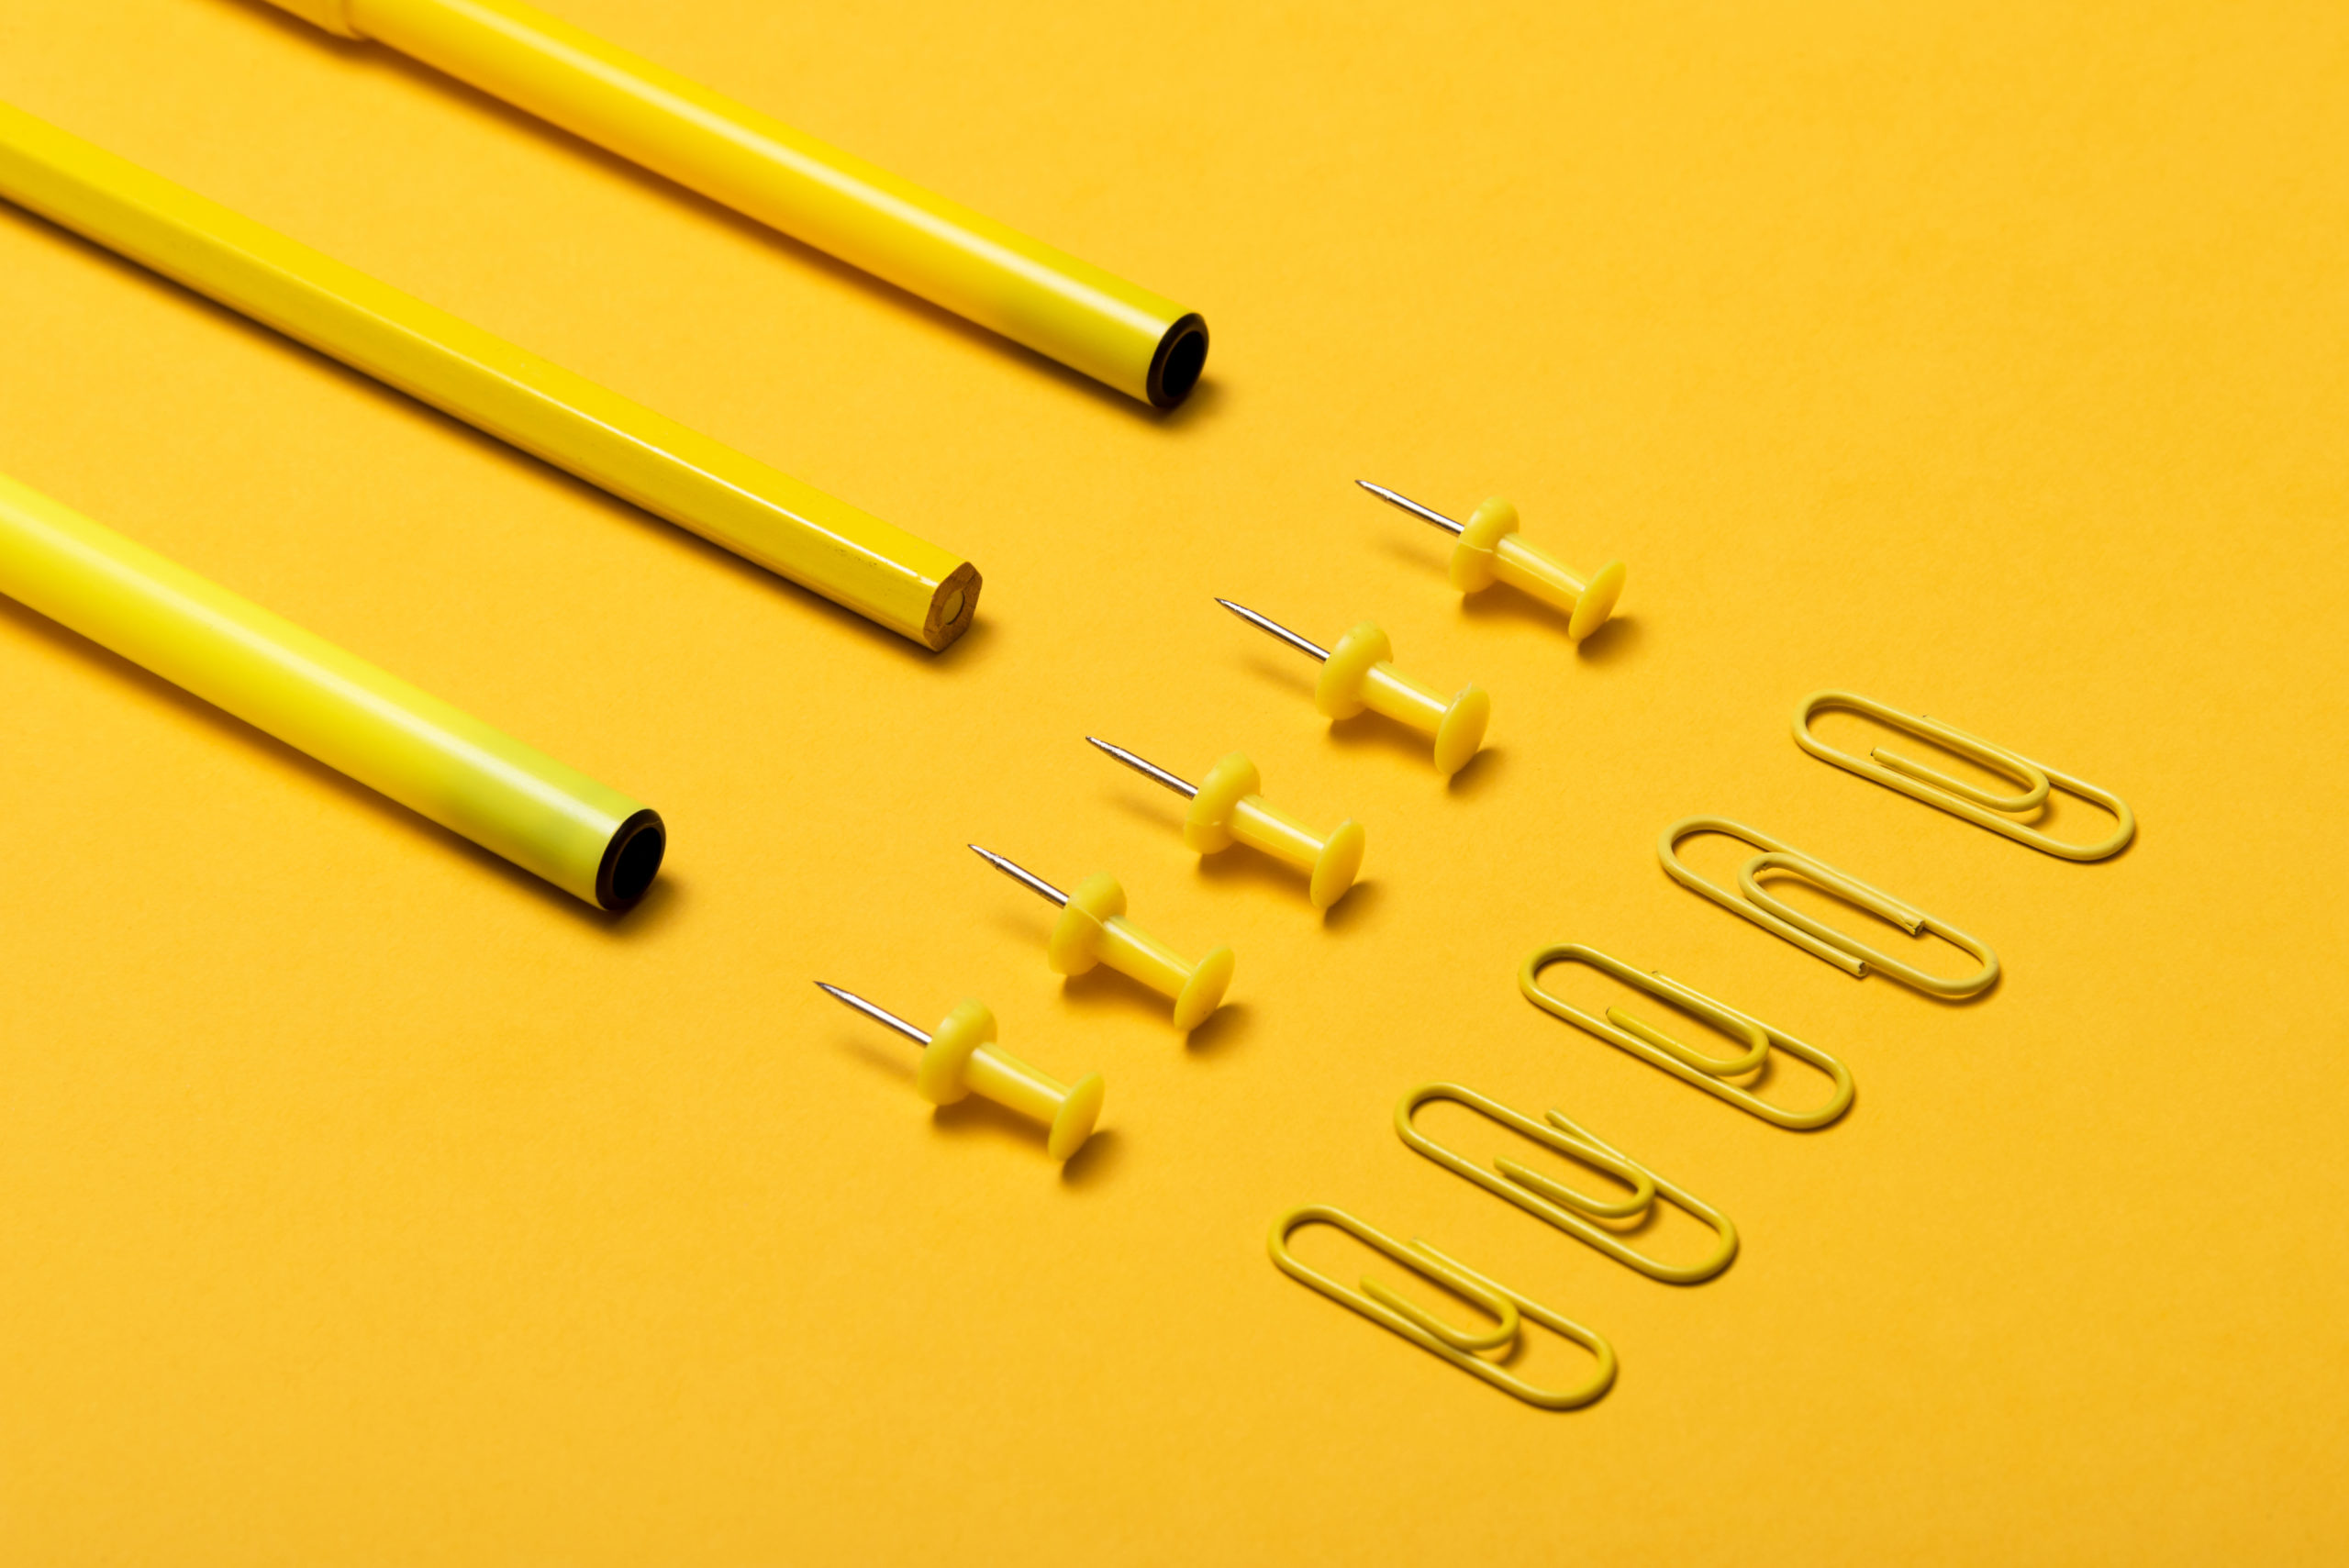 Colourful pencils, thumbtacks and clips over a yellow background